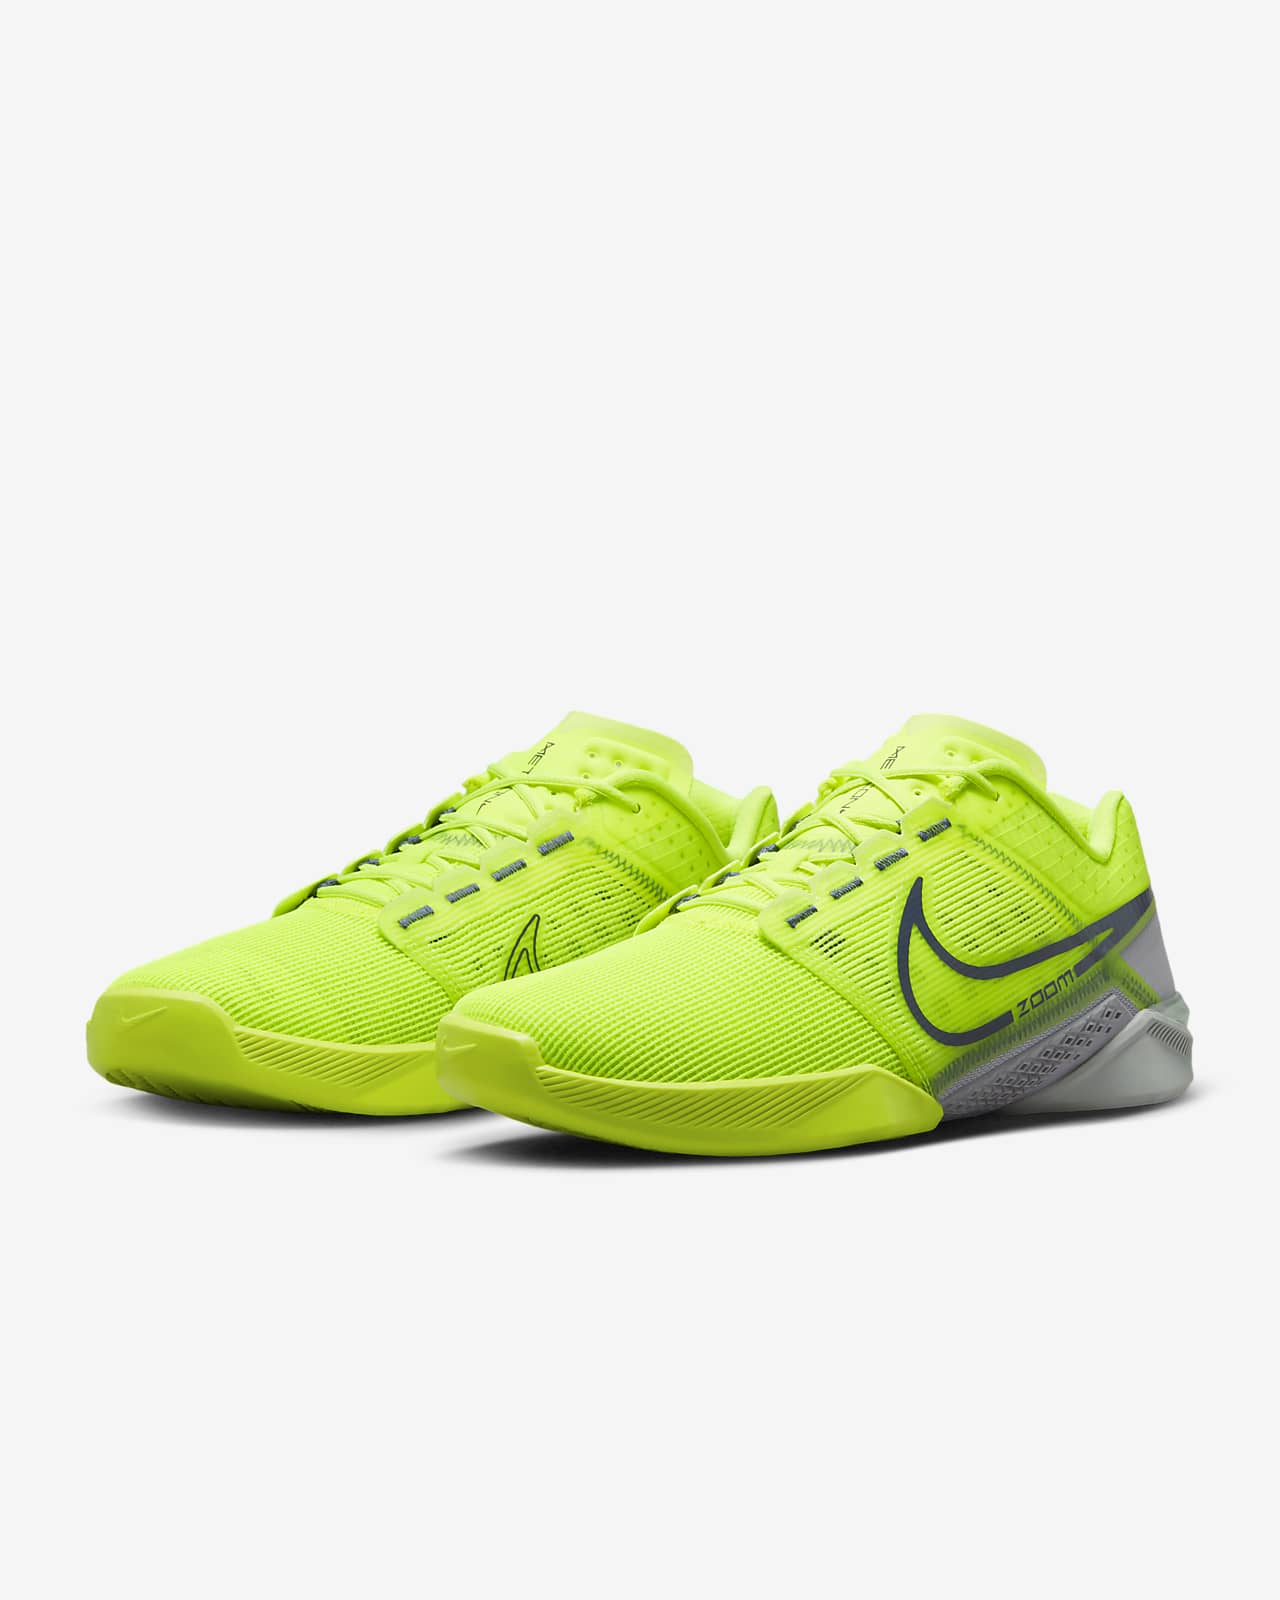 Nike Zoom 2 Men's Workout Shoes. Nike ID